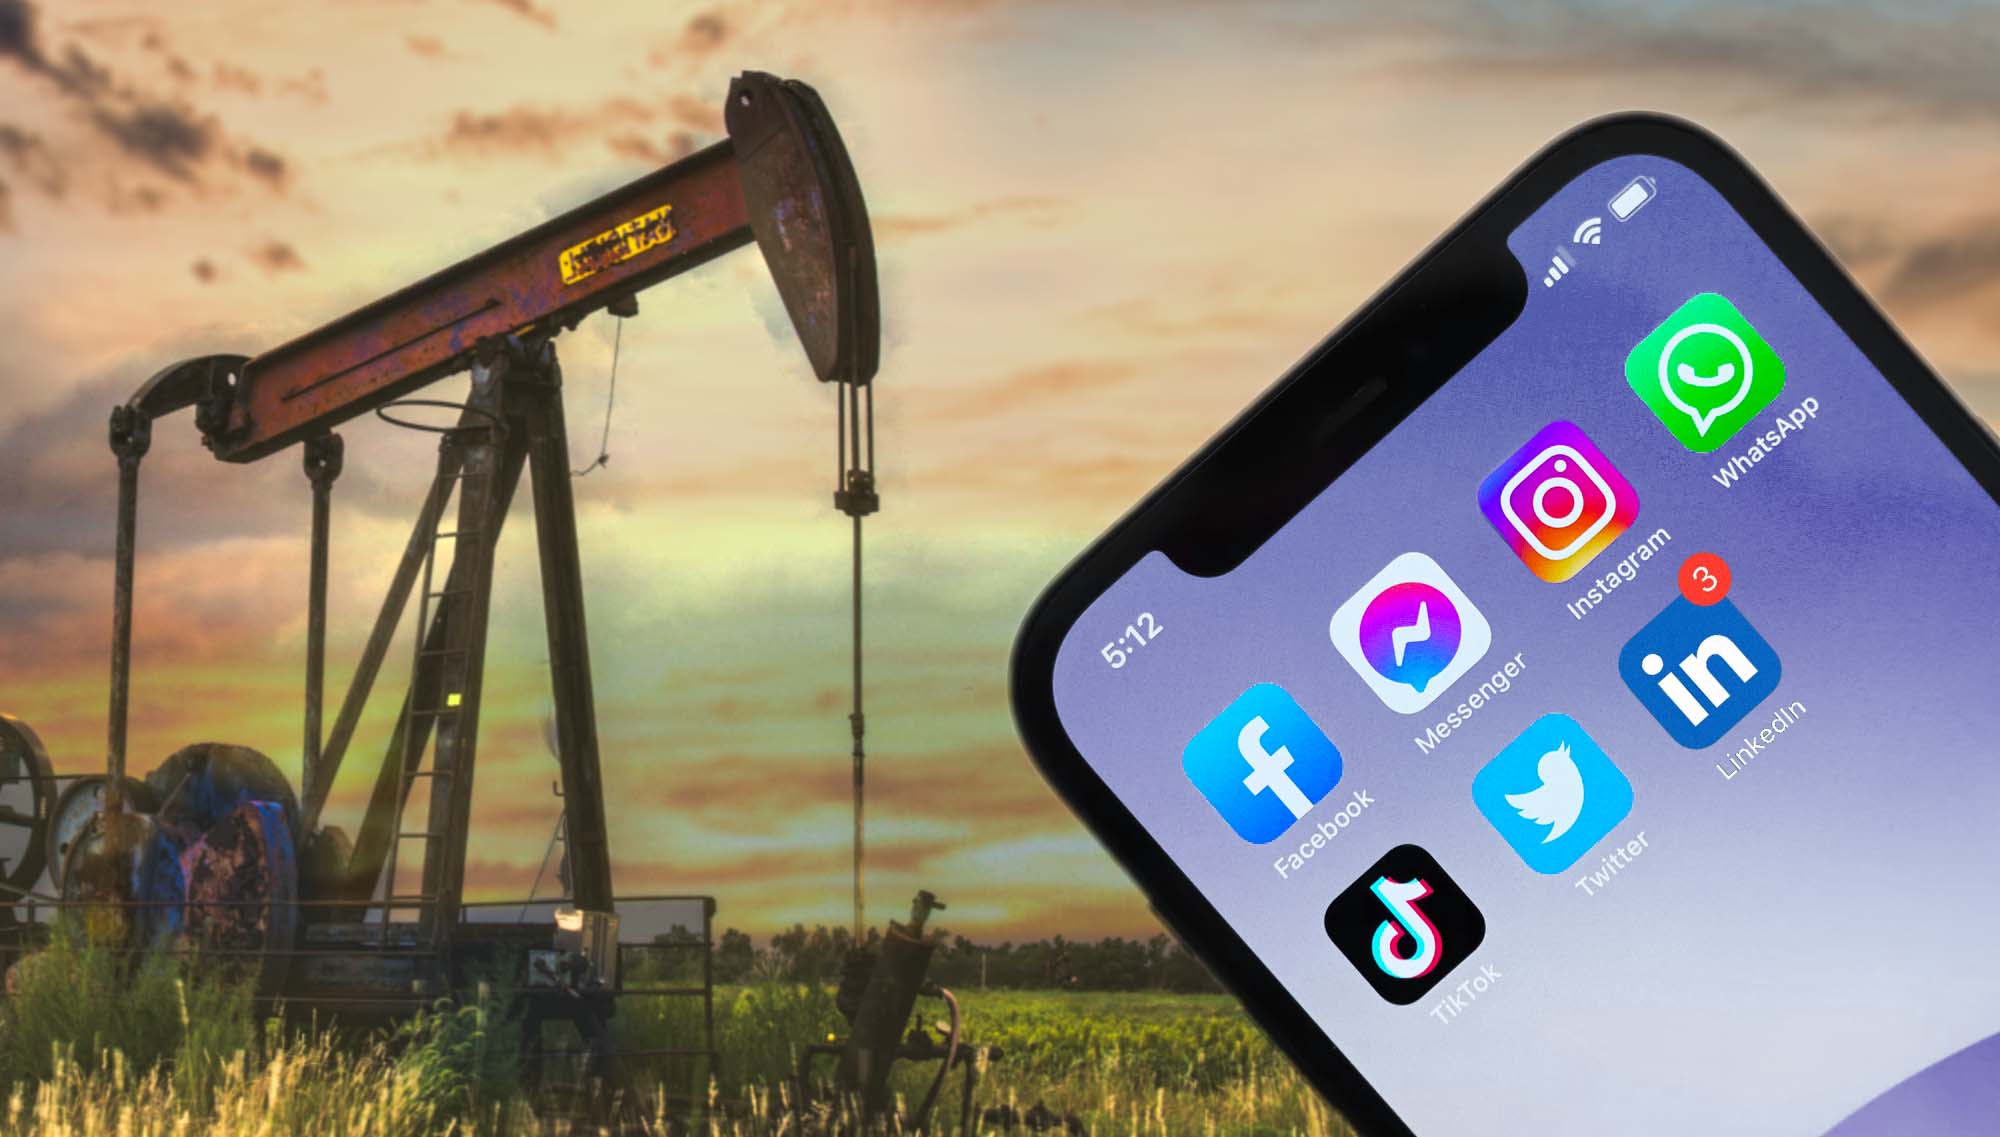 Featured image for “Social media marketing for oil and gas: 7 tips you need to know”